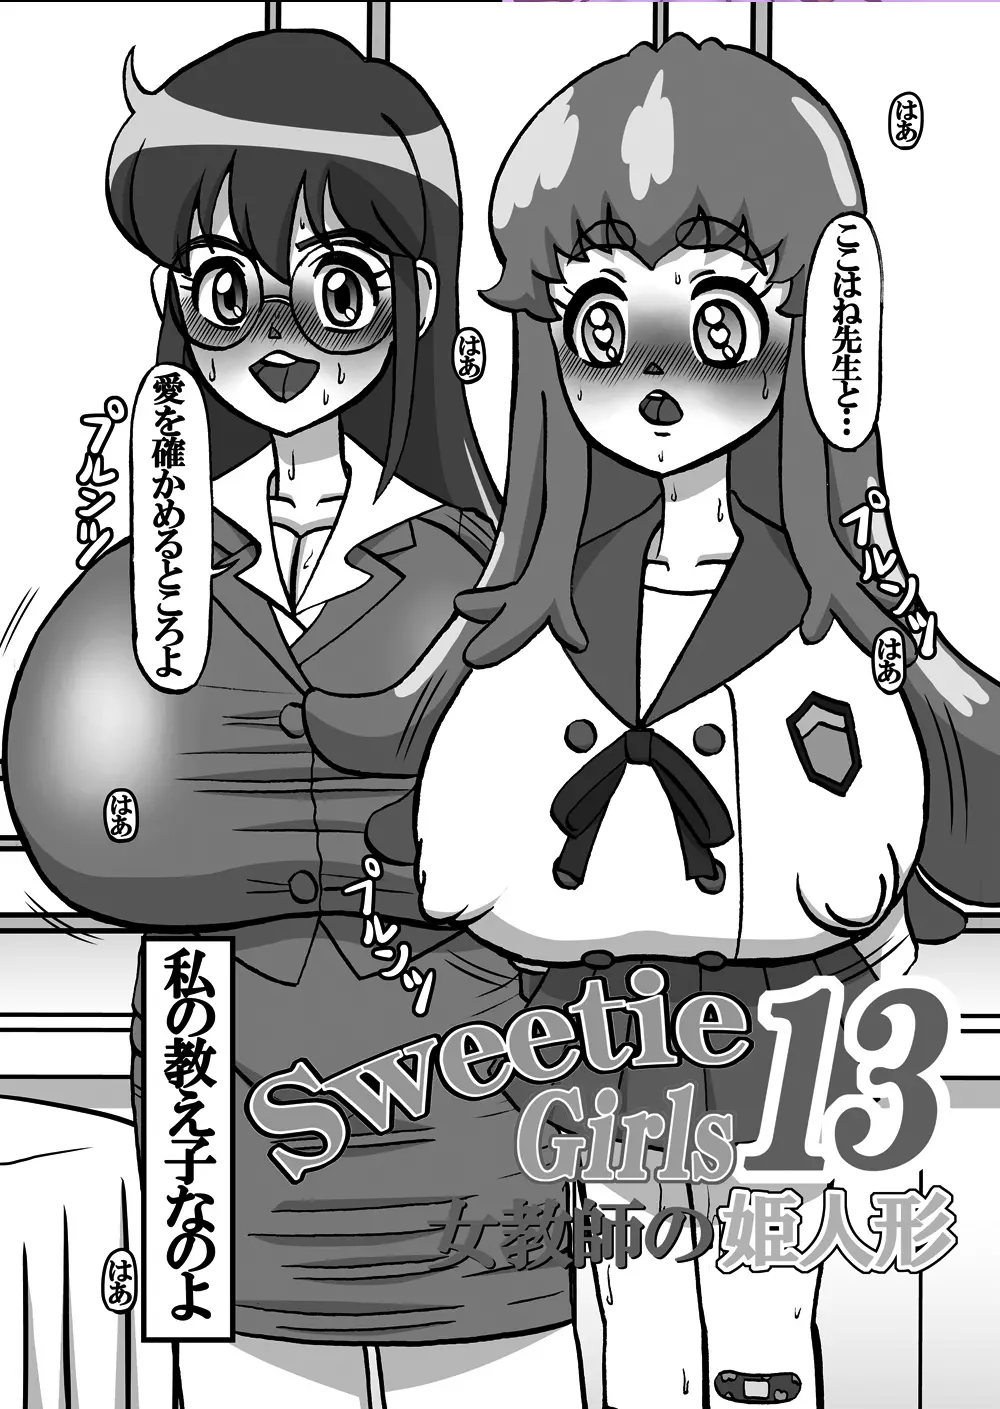 Sweetie Girls 13 ～女教師の姫人形～ Page.4